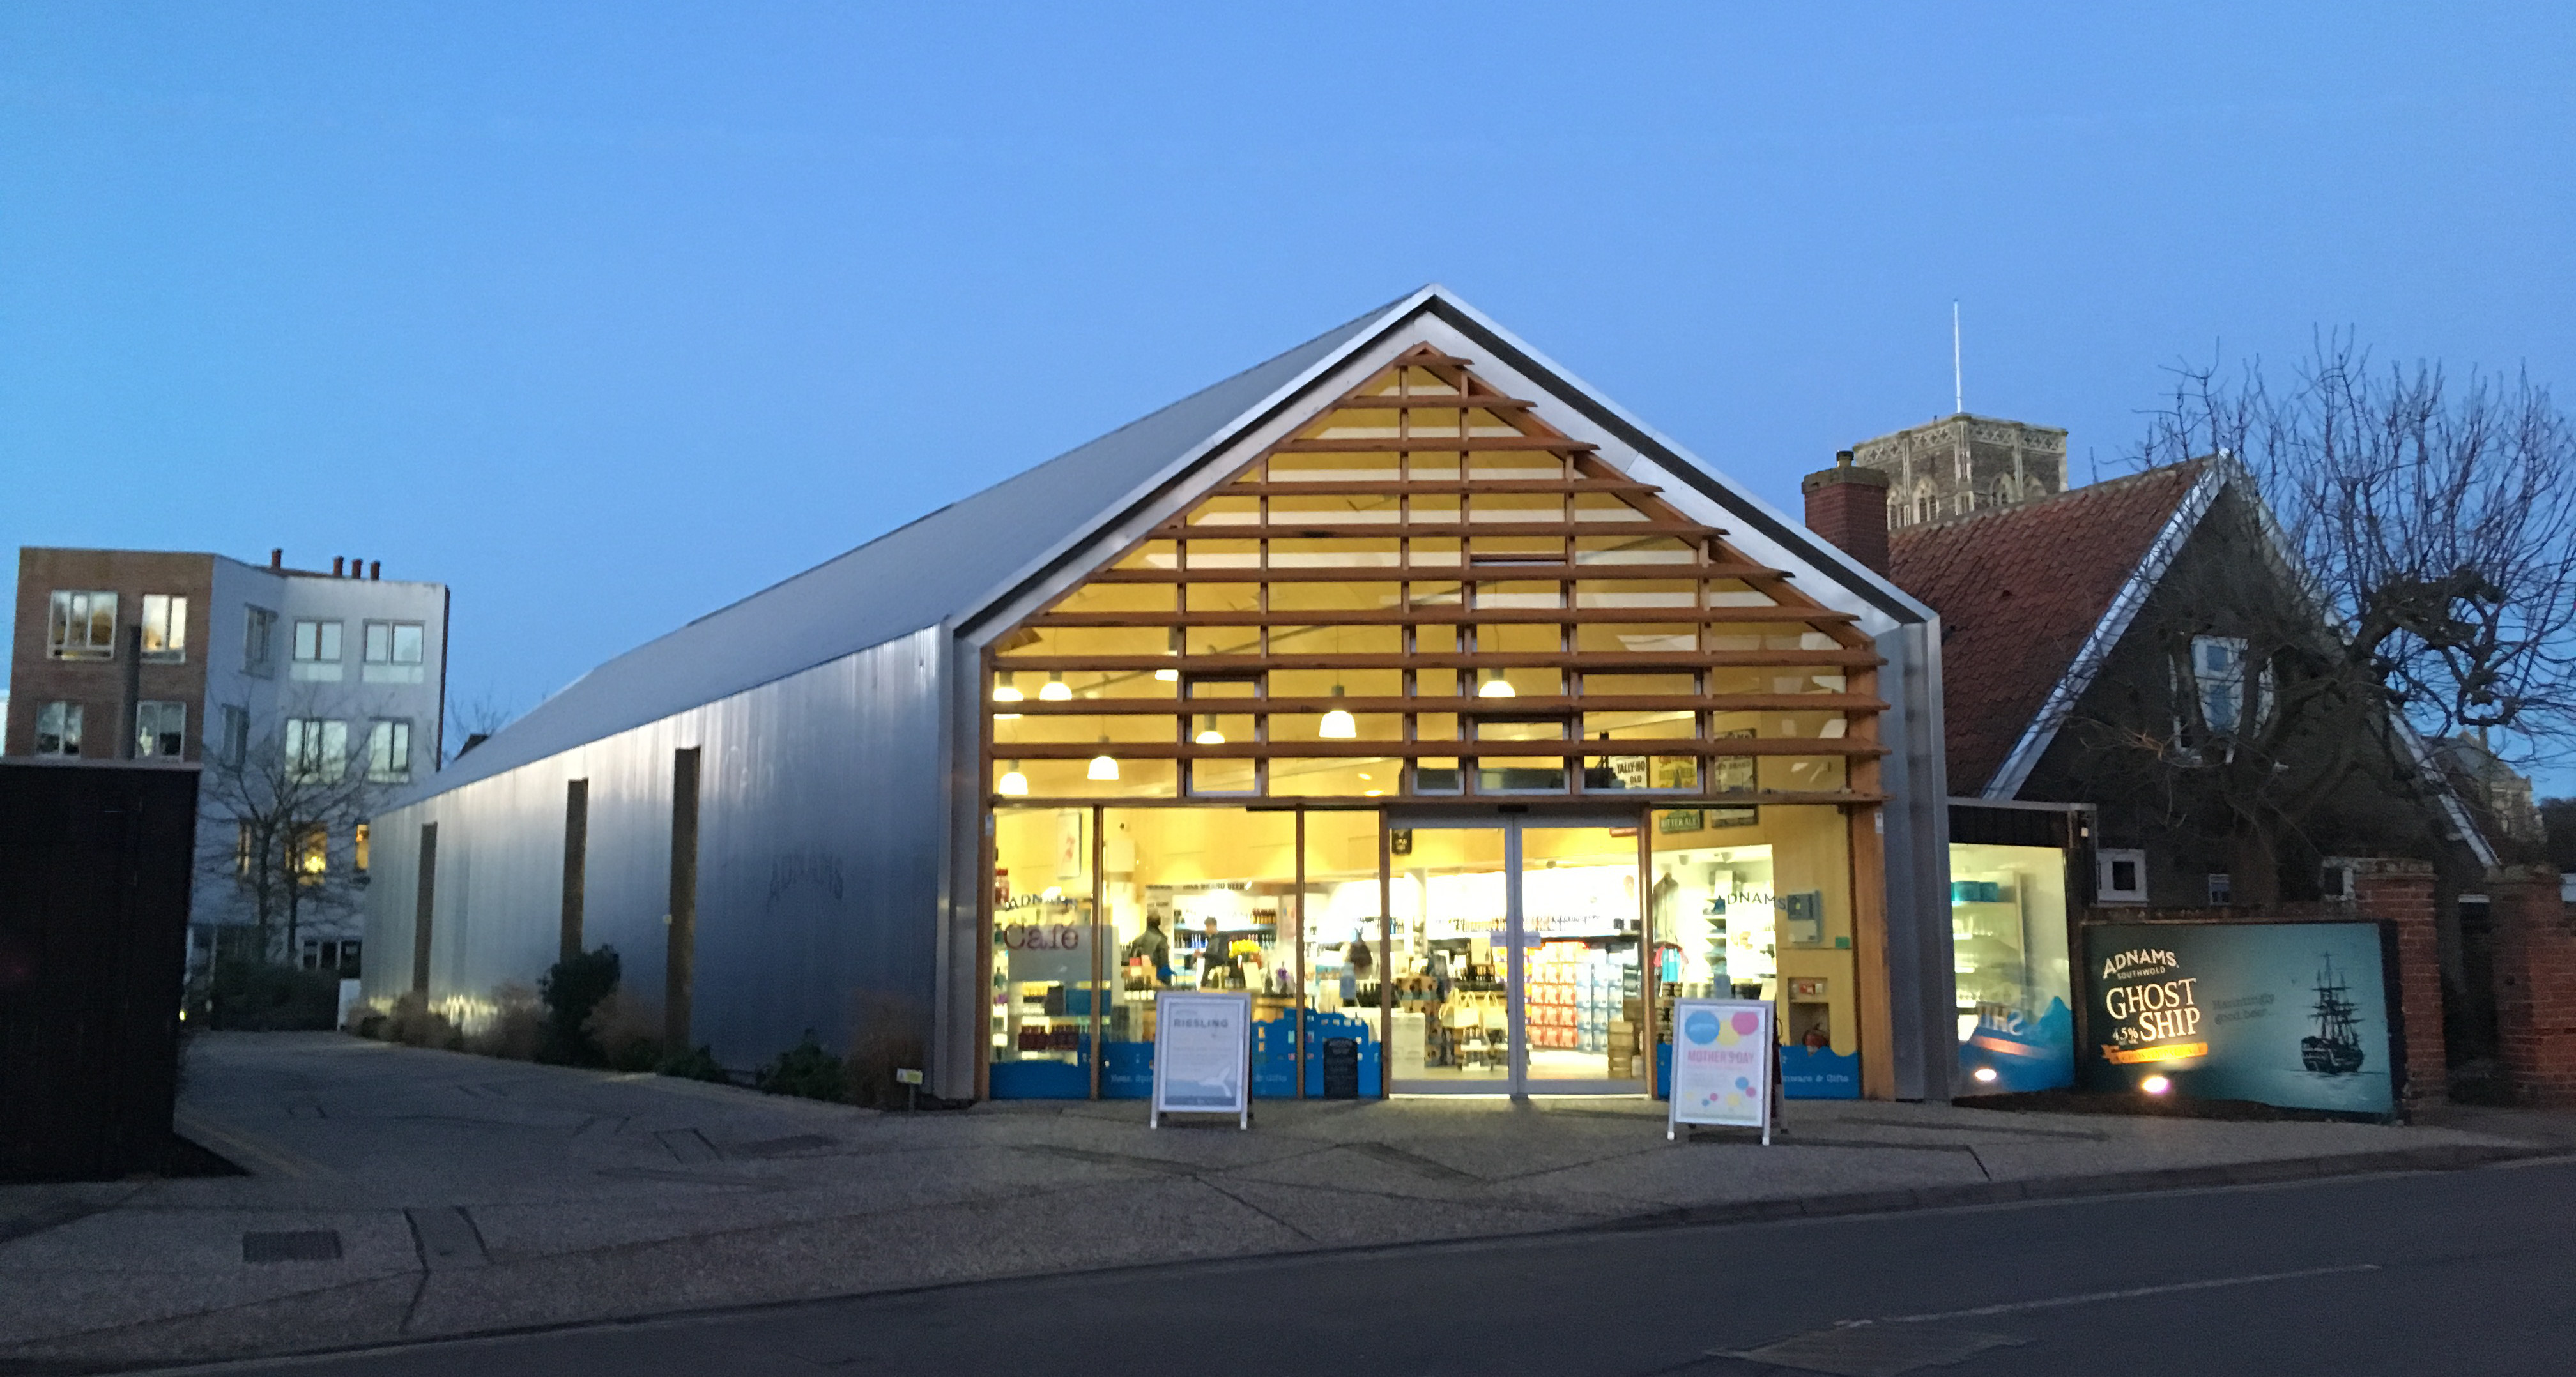 Adnams store in Southwold: built from sustainably sourced timber and insulated with sheeps wool